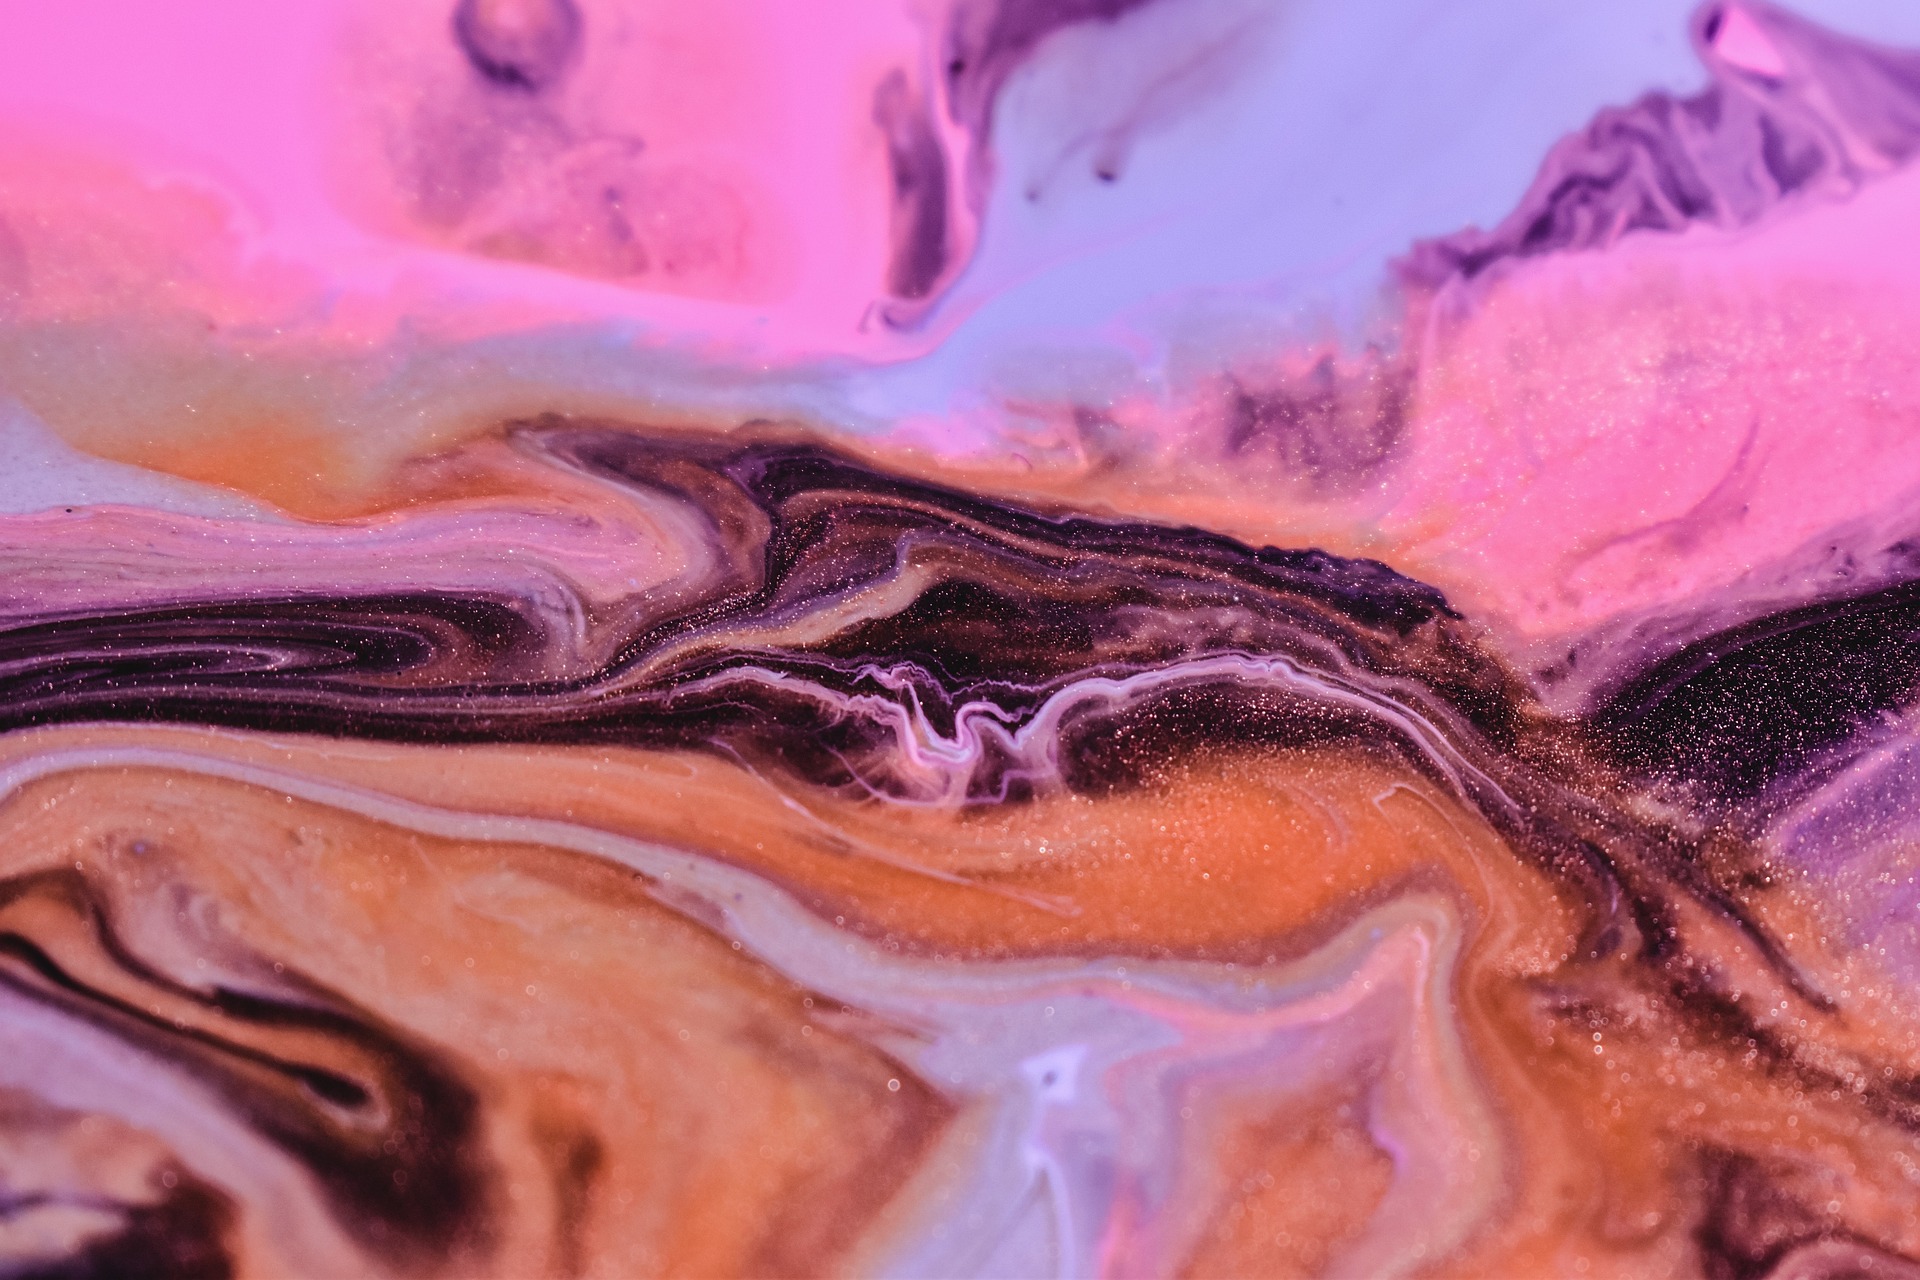 Acrylic Pour Painting Supplies for Stunning DIY Fluid Arts Projects